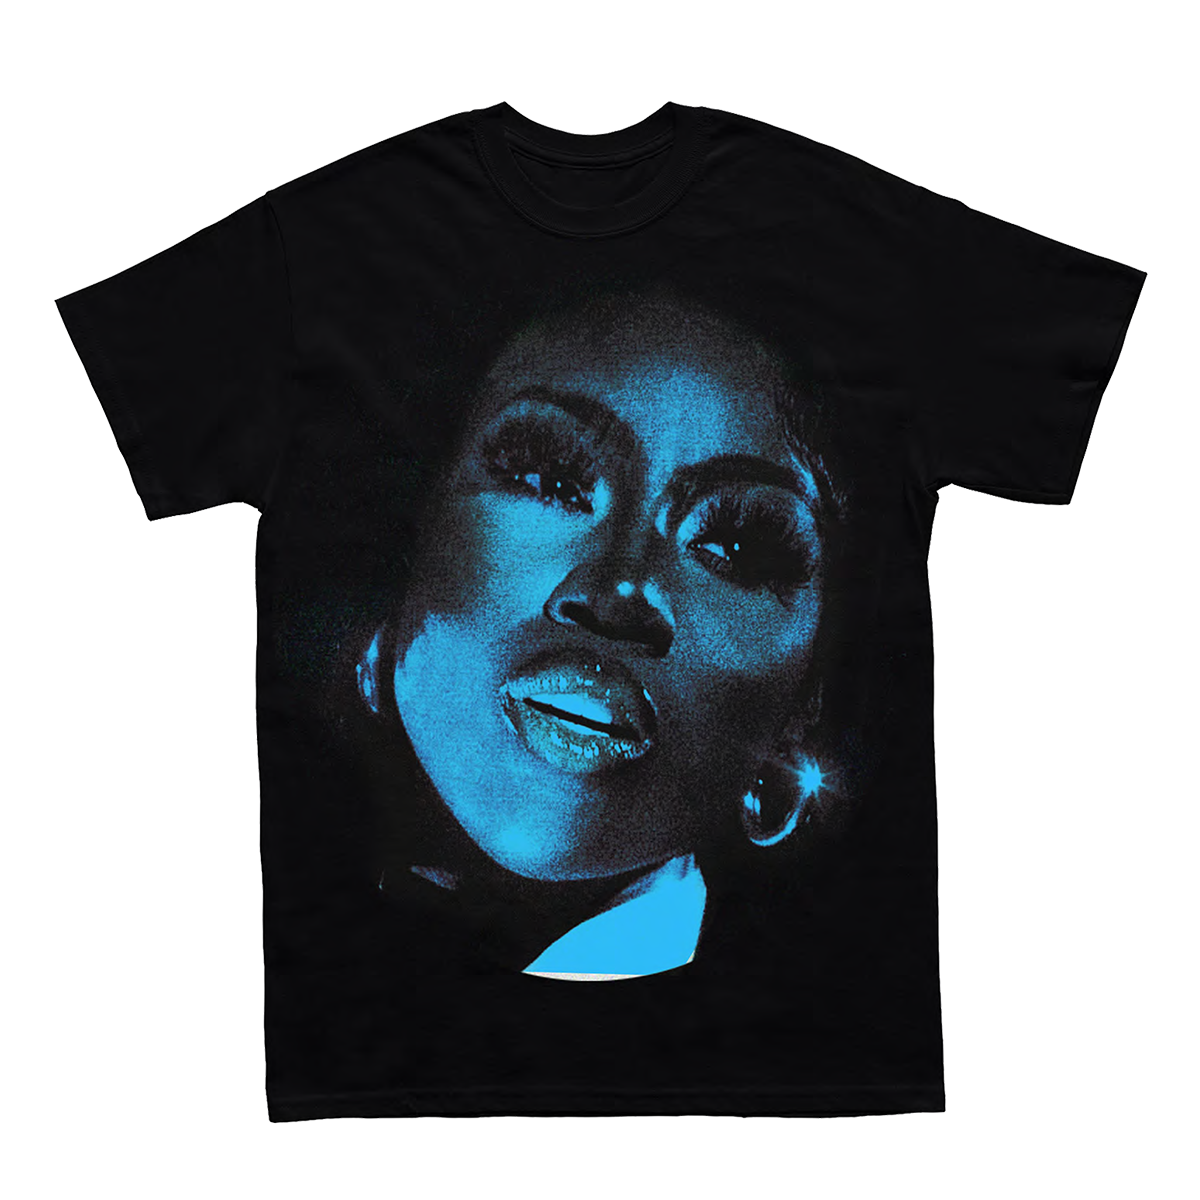 Bree Runway - Limited Edition Blue UK Debut Tour Tee